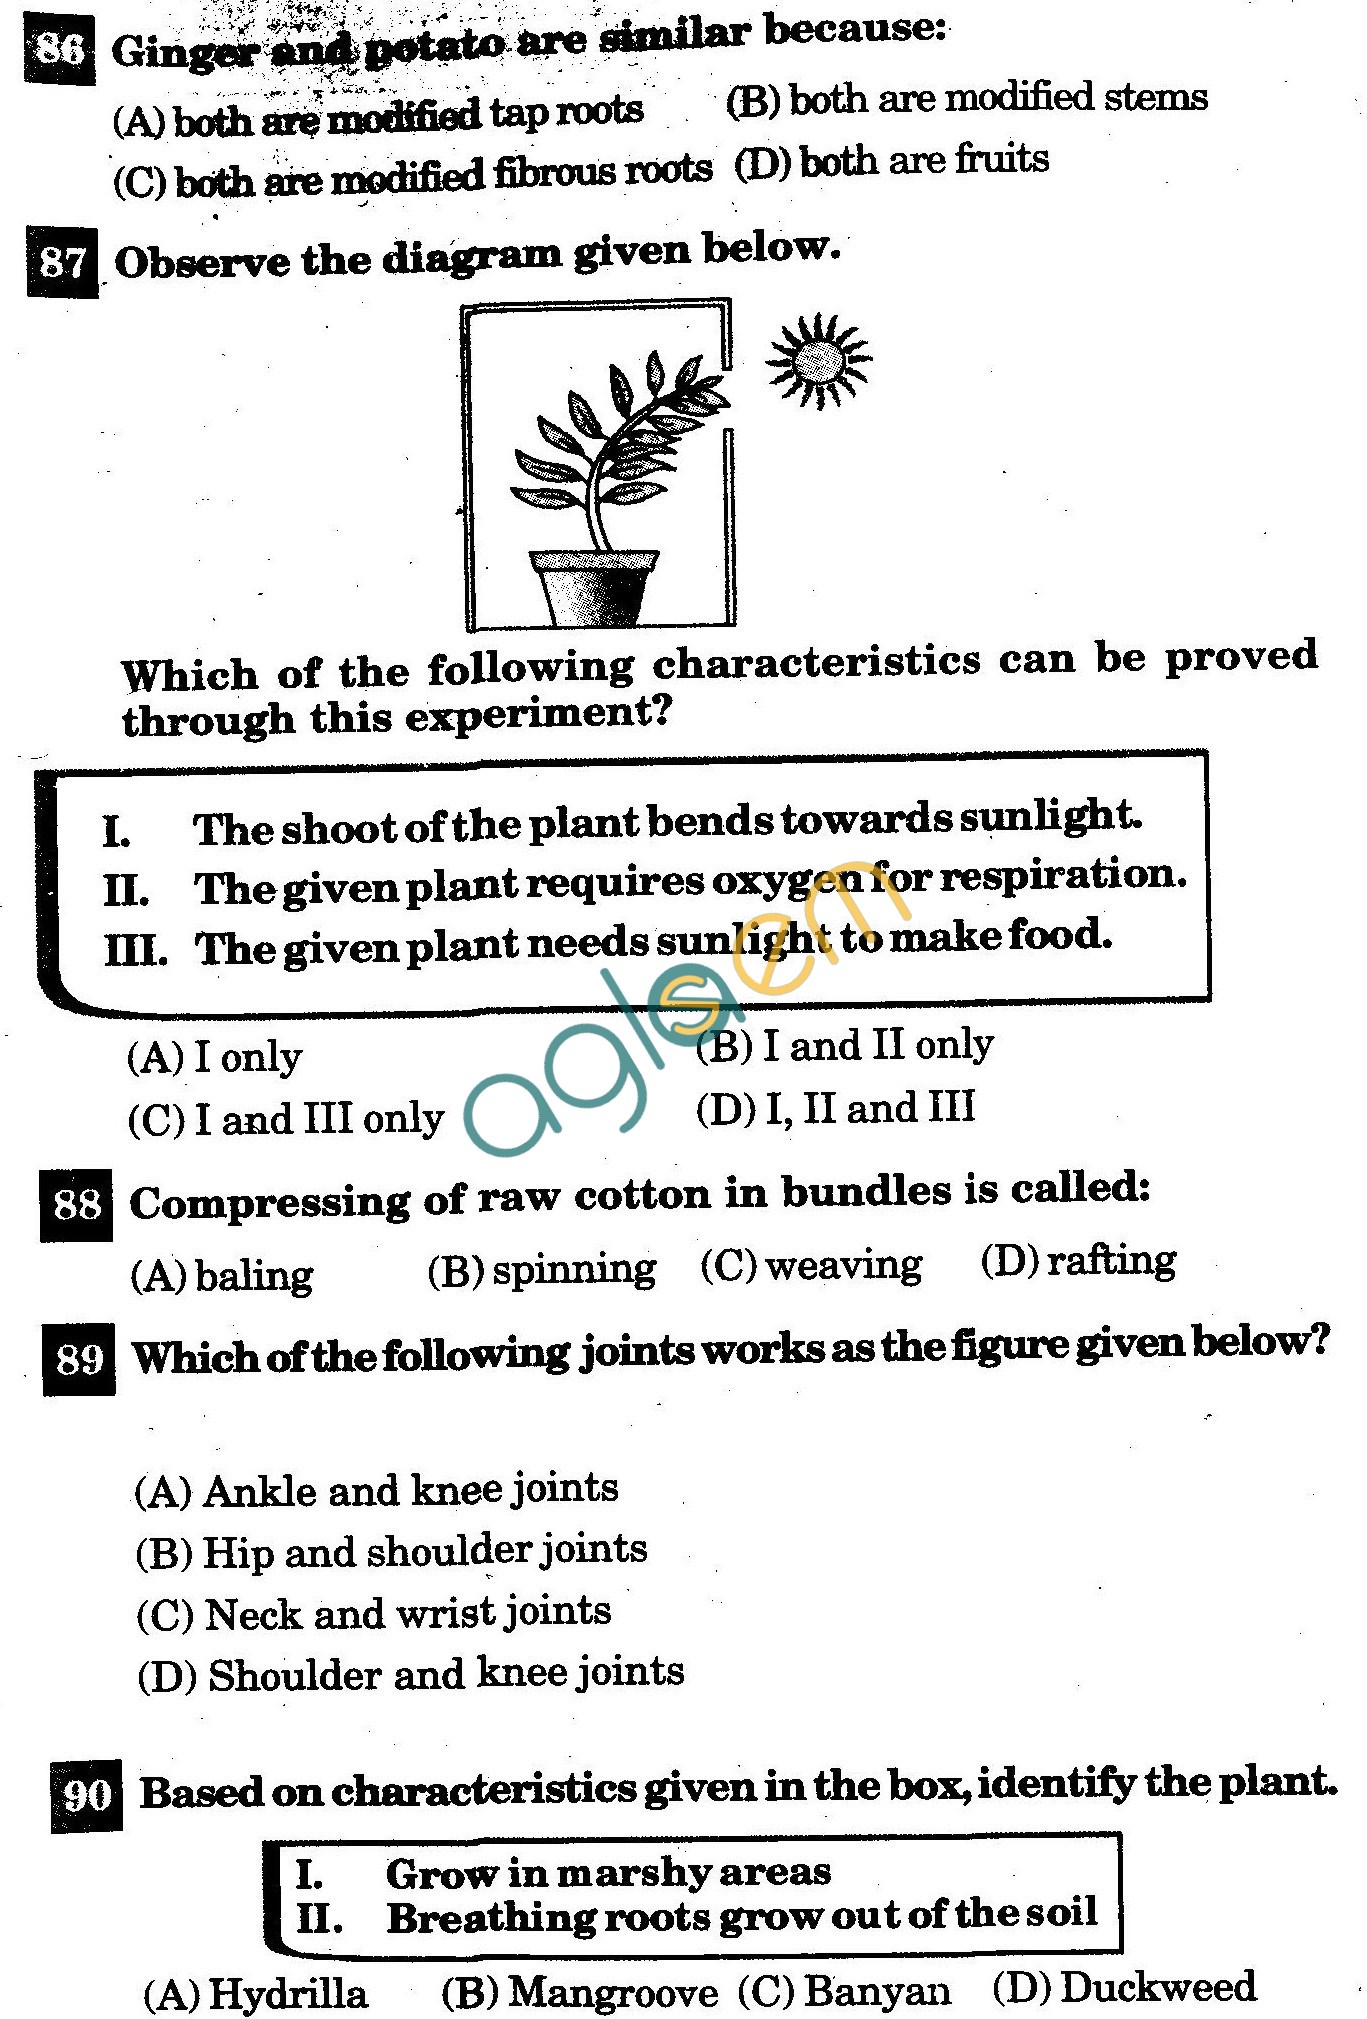 NSTSE 2011: Class VI Question Paper with Answers - Biology